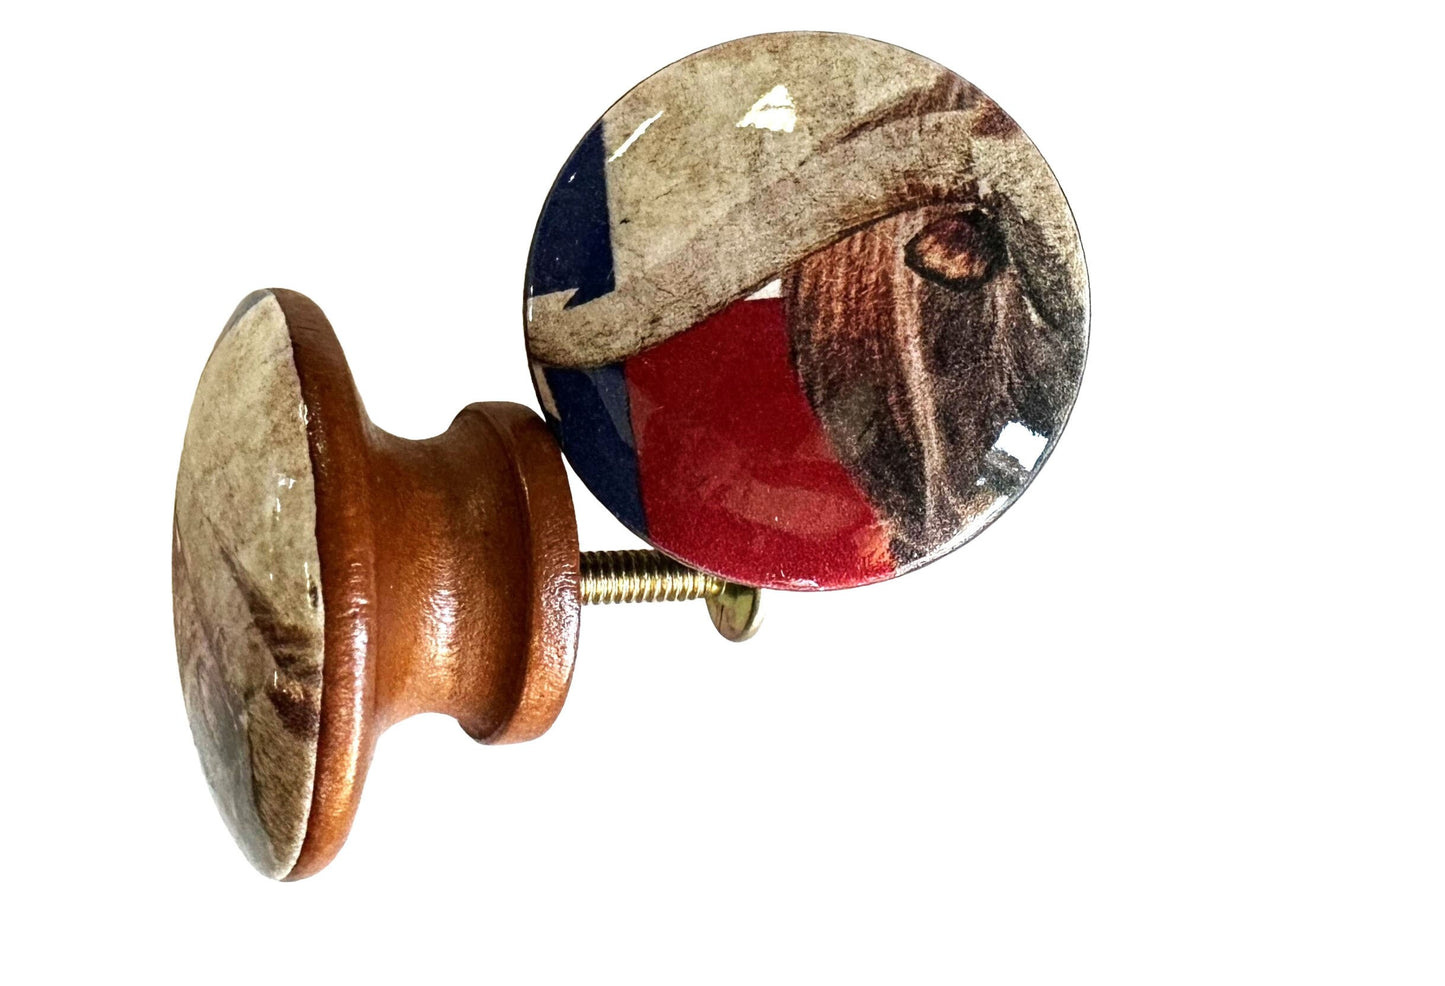 New Release Cabinet Knobs, Drawer Knobs and Pulls, Longhorn and Texas Flag Teri James Photography, Kitchen Cabinet Knobs Wood Cabinet Knobs